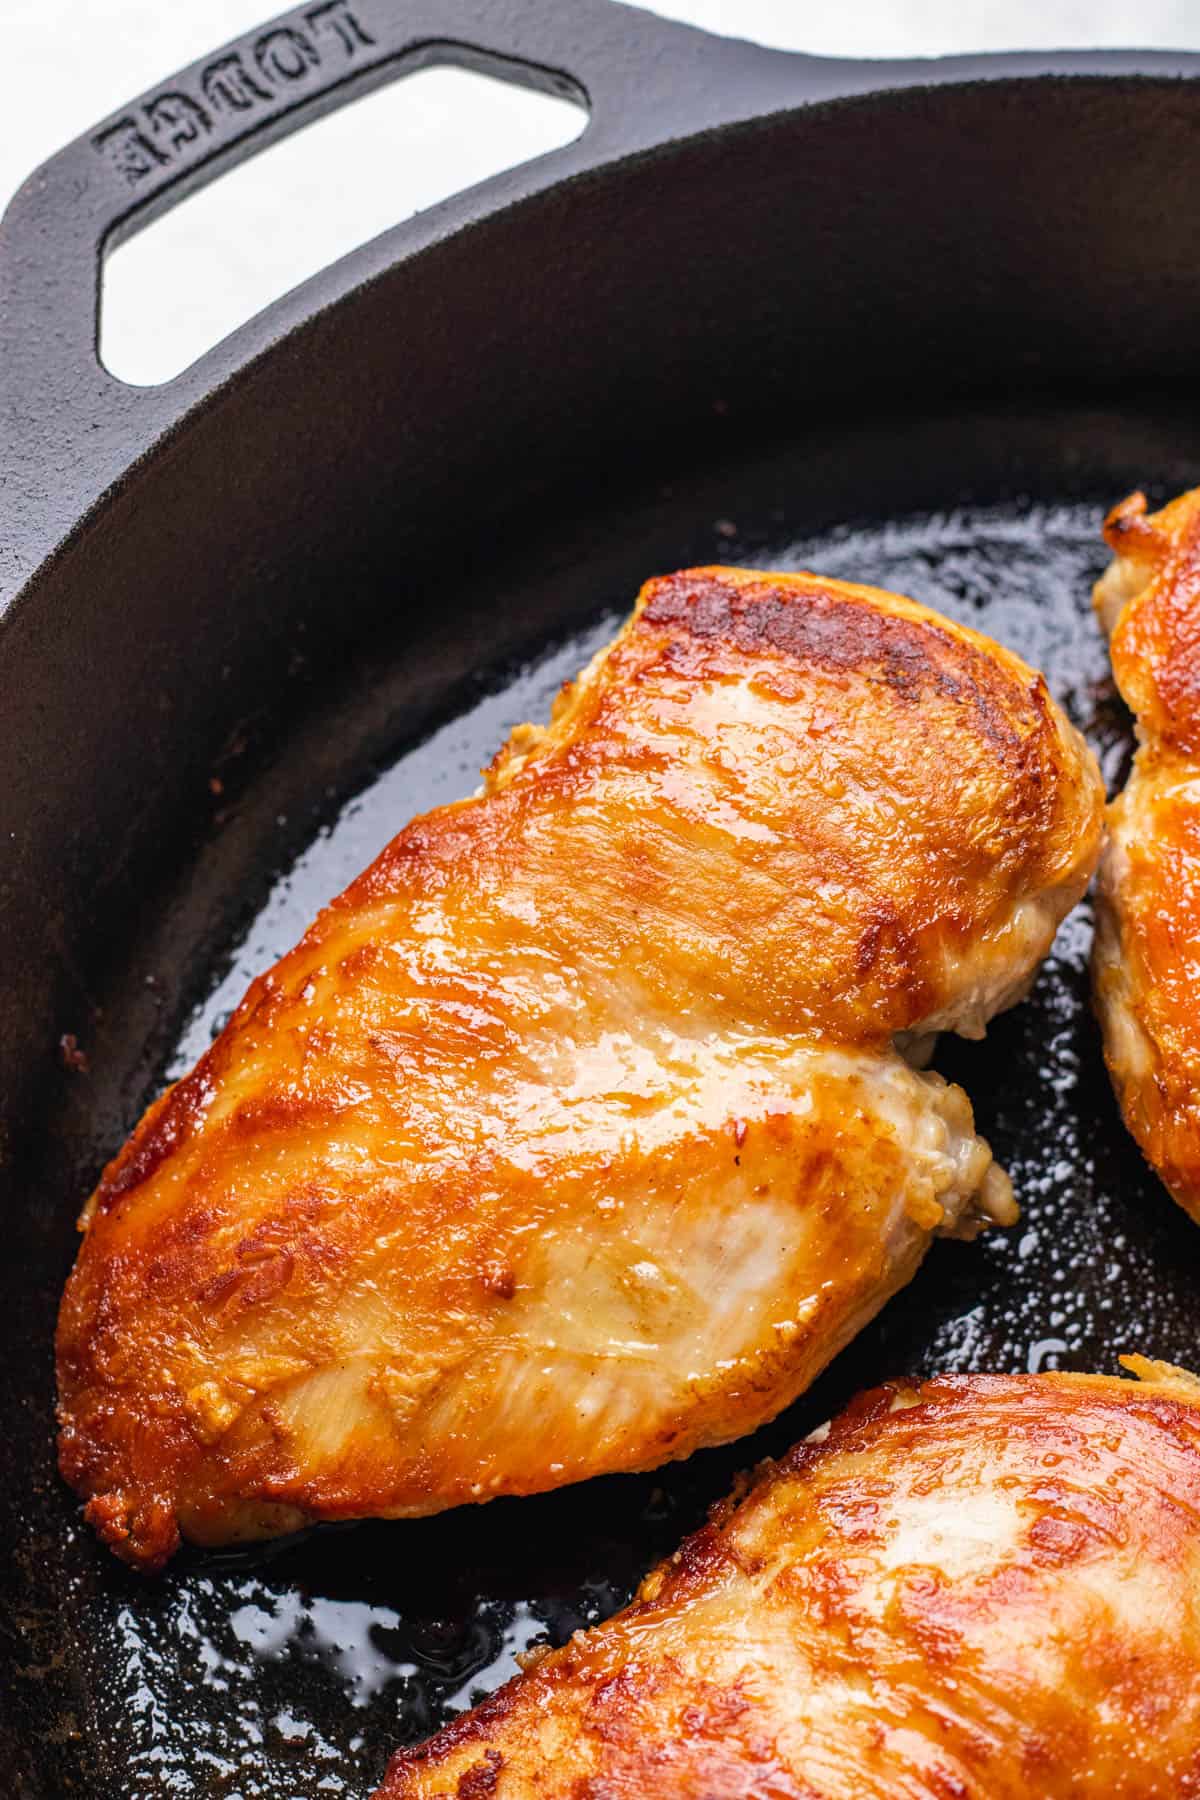 Seared chicken breasts in an cast iron skillet.